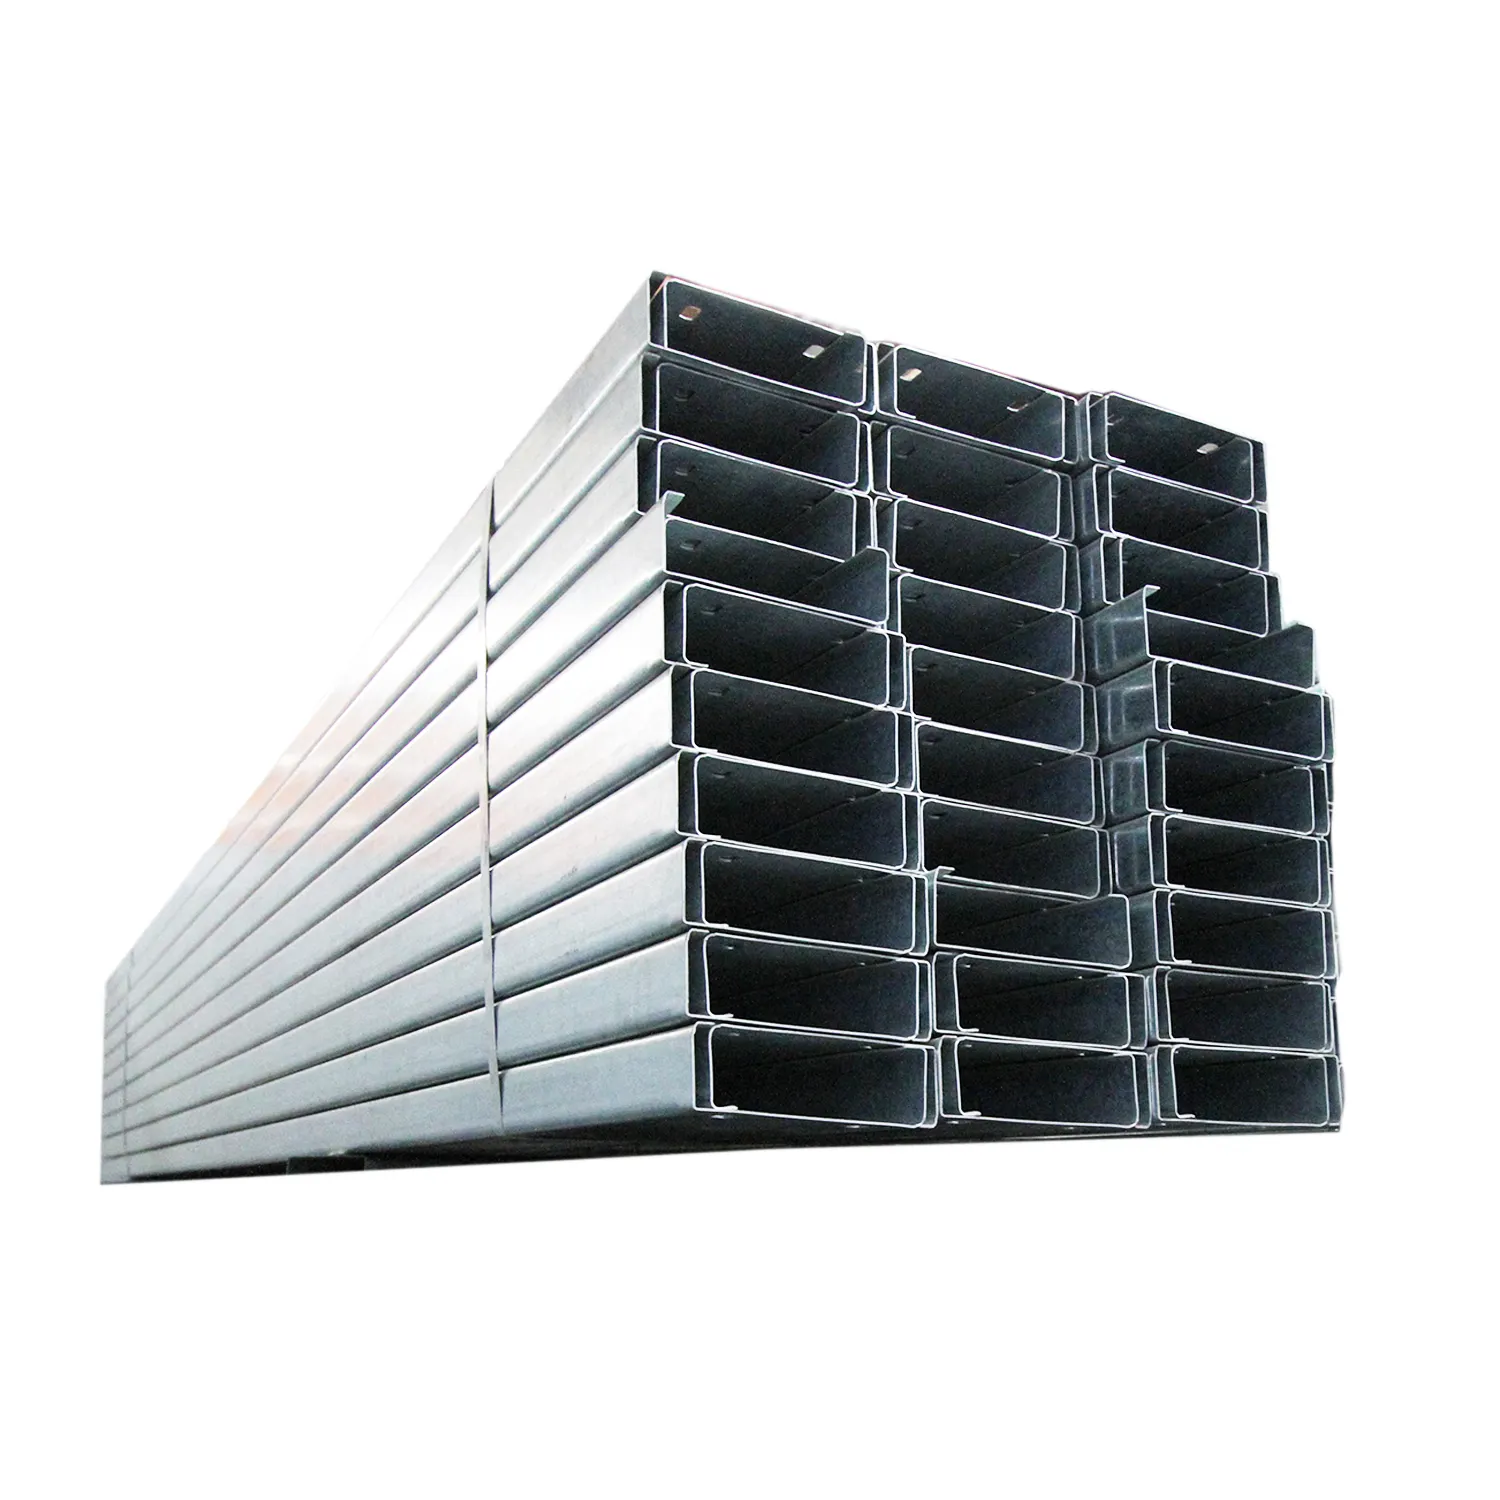 low price wholesale price HDG Steel C Channel Purlin 41x41x2 mm Slotted Channel galvanized metal tracks galvanized channel